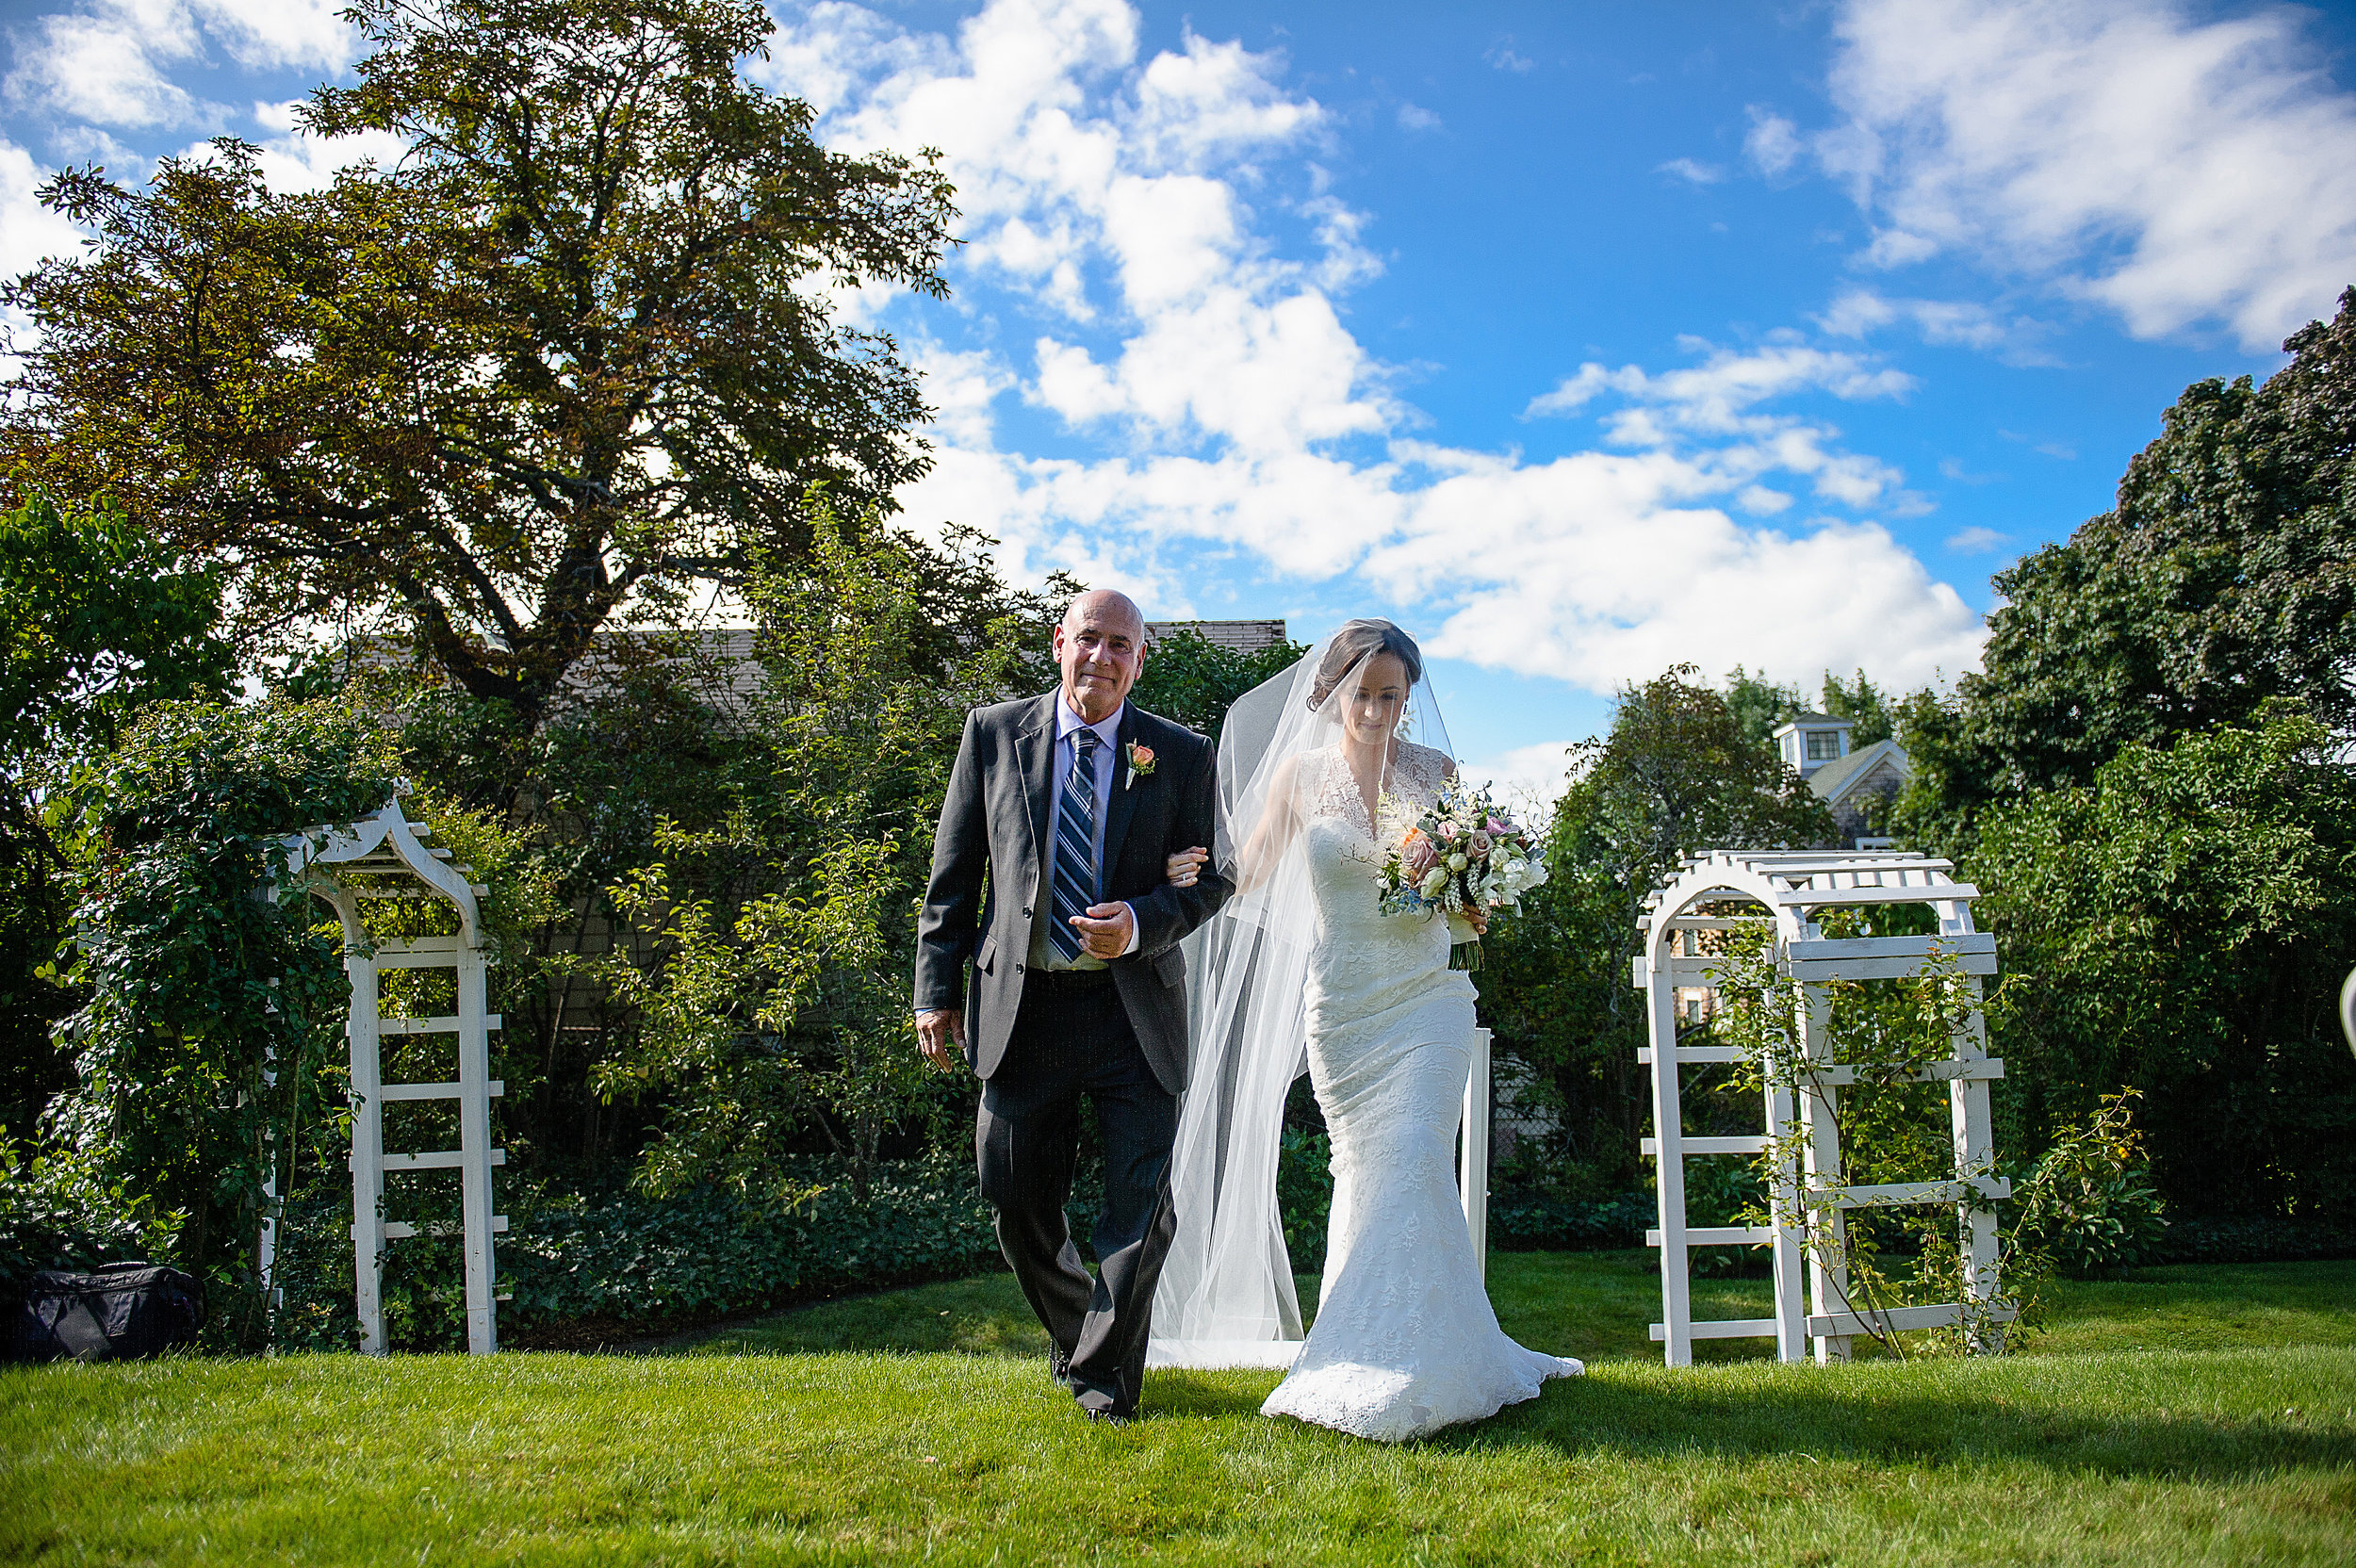  Melanie Voros brings twenty years of award-winning experience as a wedding planner and event designer to couples and families across New England. Whether you dream of a classic tented seaside wedding on Cape Cod or a exclusive urban Boston party, Bl